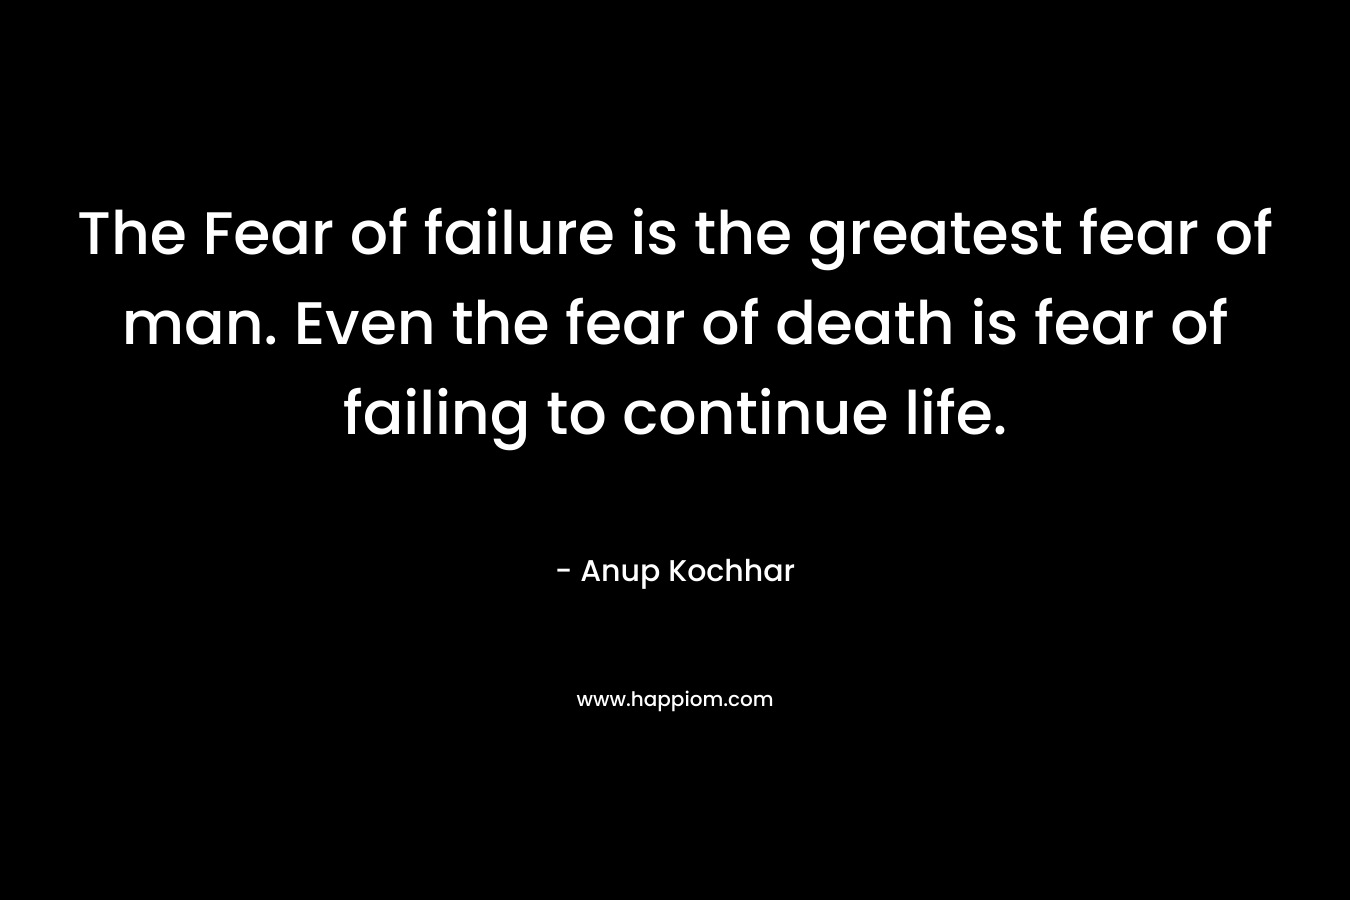 The Fear of failure is the greatest fear of man. Even the fear of death is fear of failing to continue life.